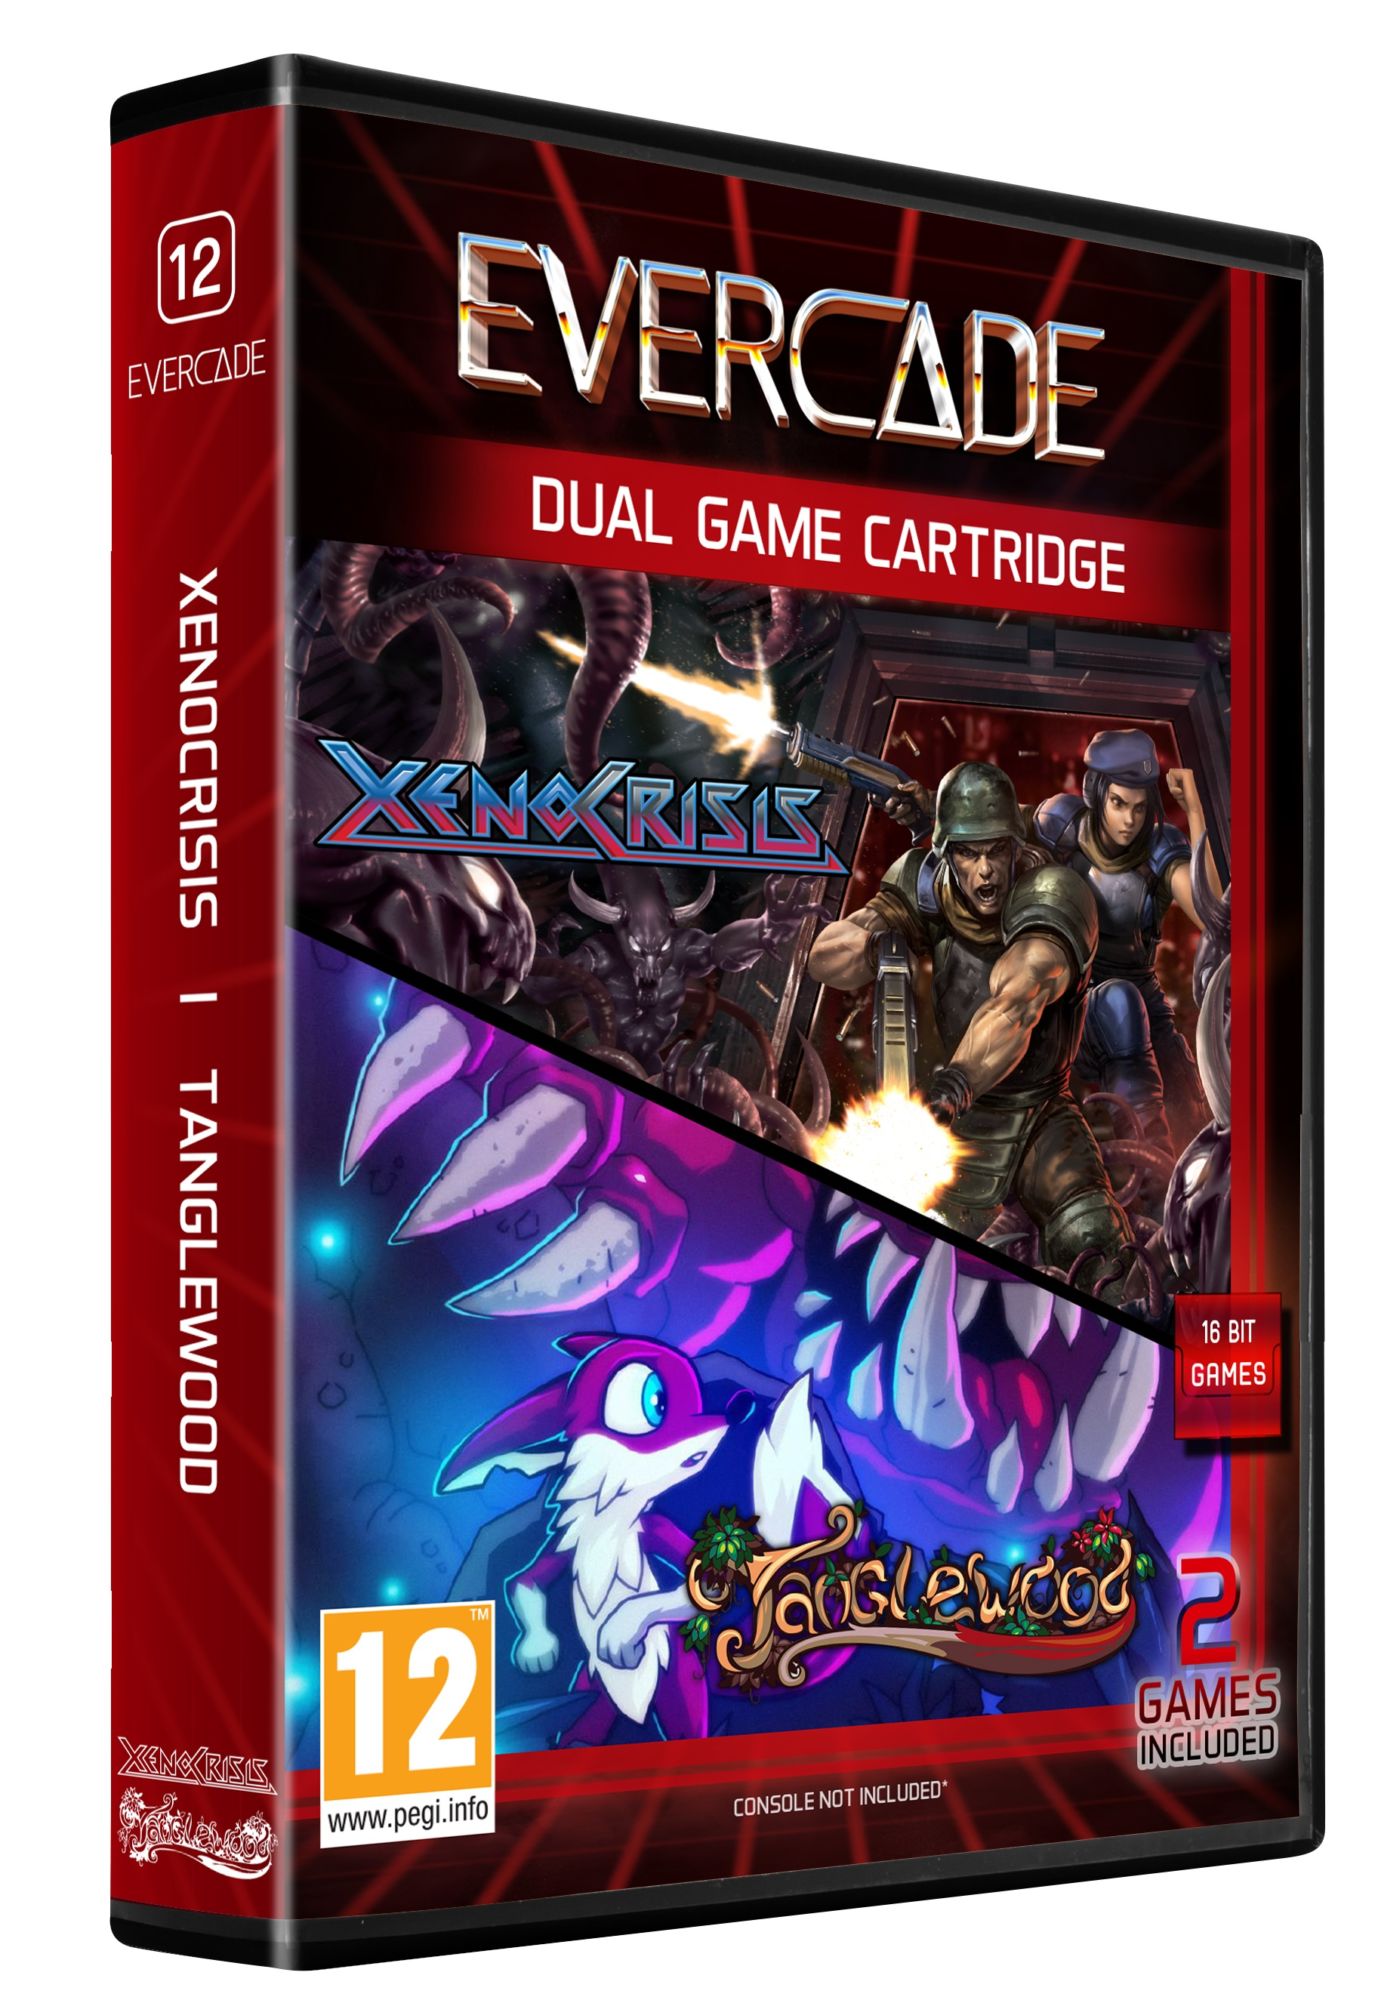 Evercade library grows stronger with a Tanglewood/Xeno Crisis dual cartridge